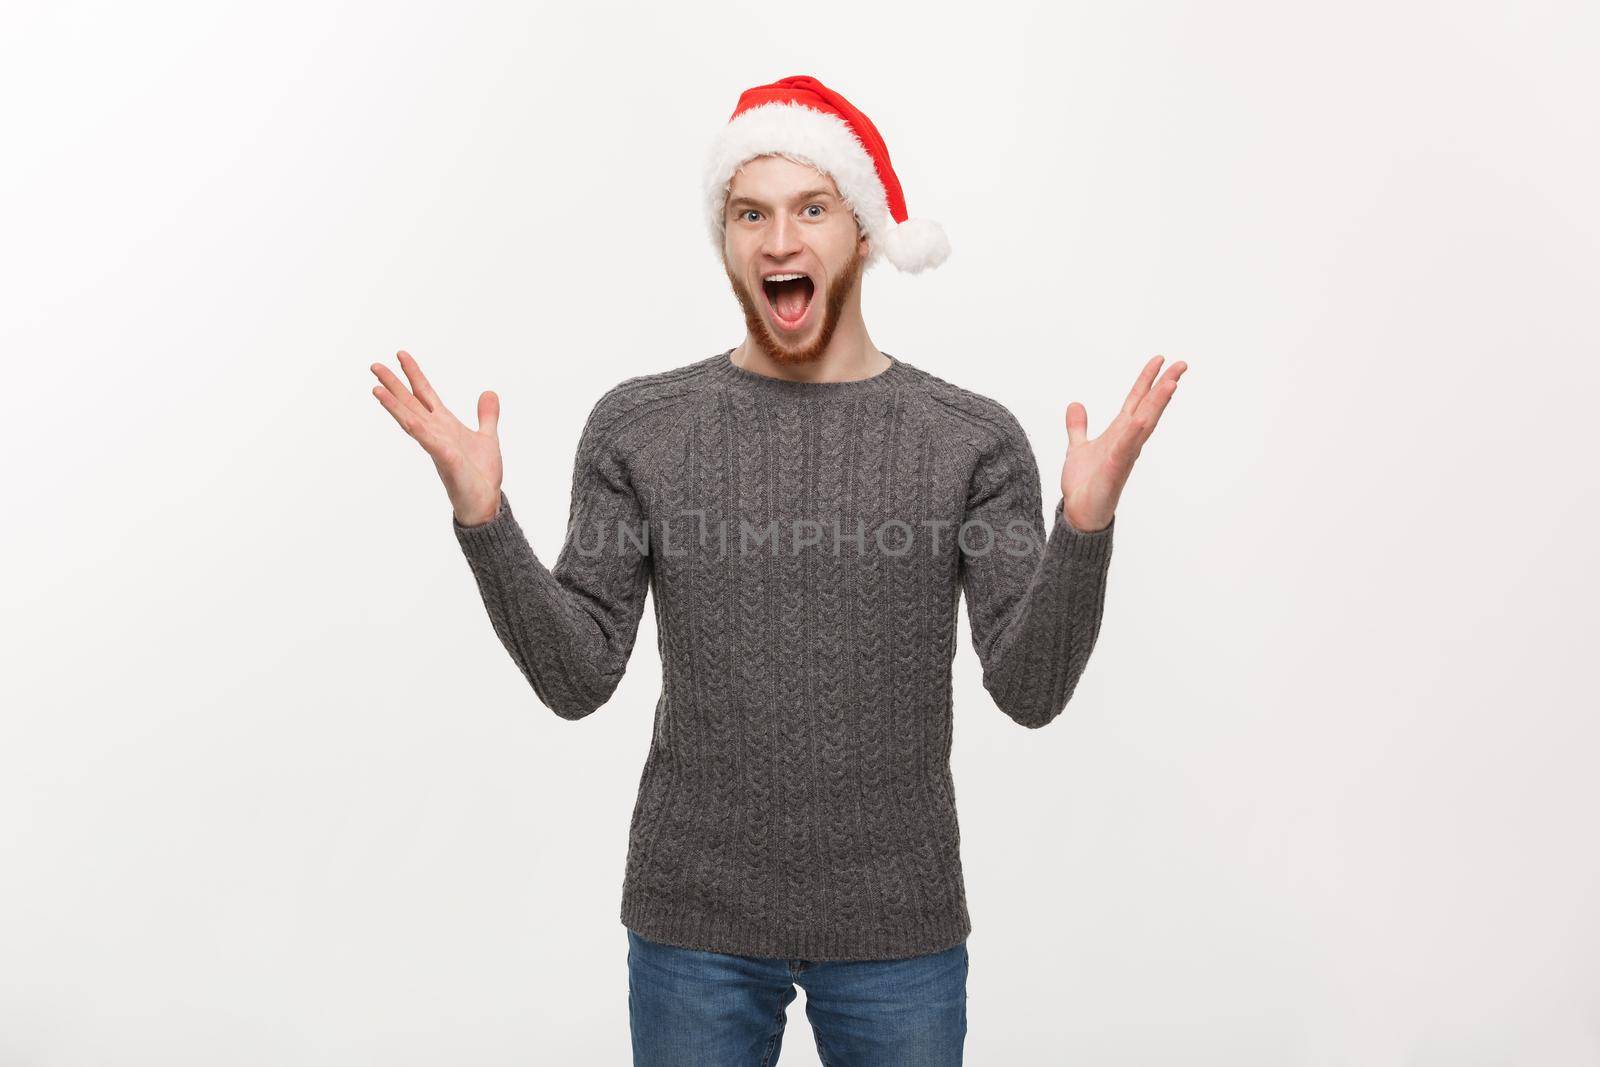 Holiday Concept - Young beard man in sweater showing hand up with exciting feeling.